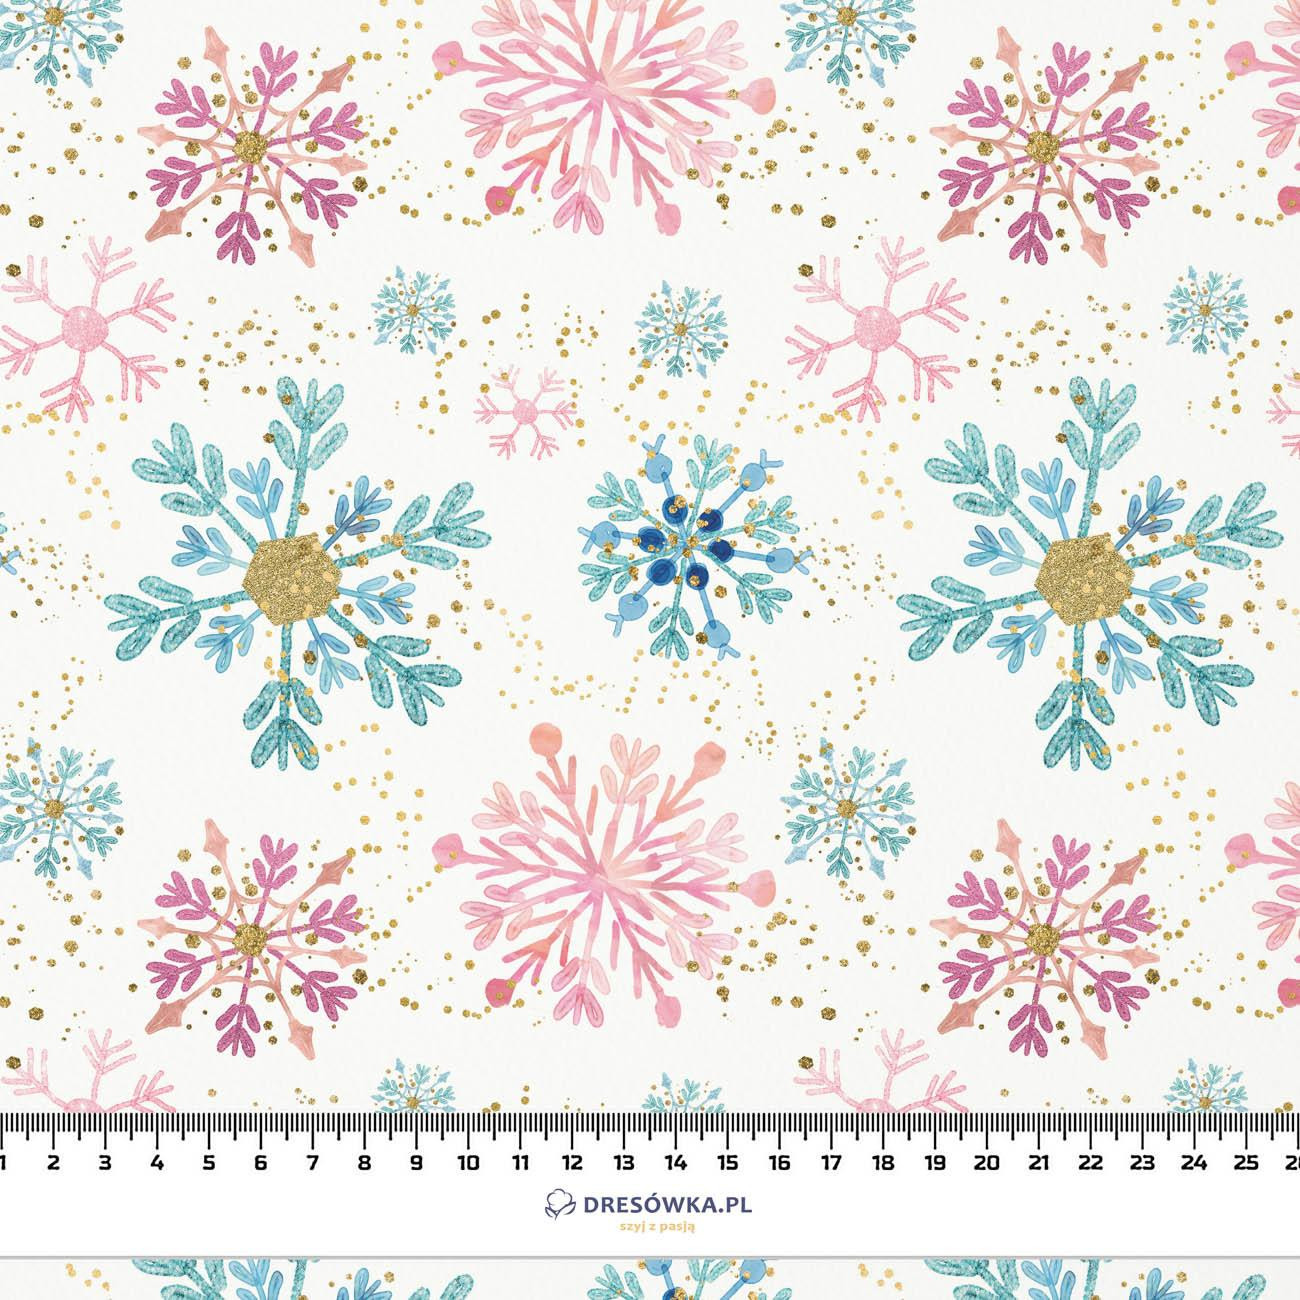 SNOWFLAKES MIX  - Waterproof woven fabric